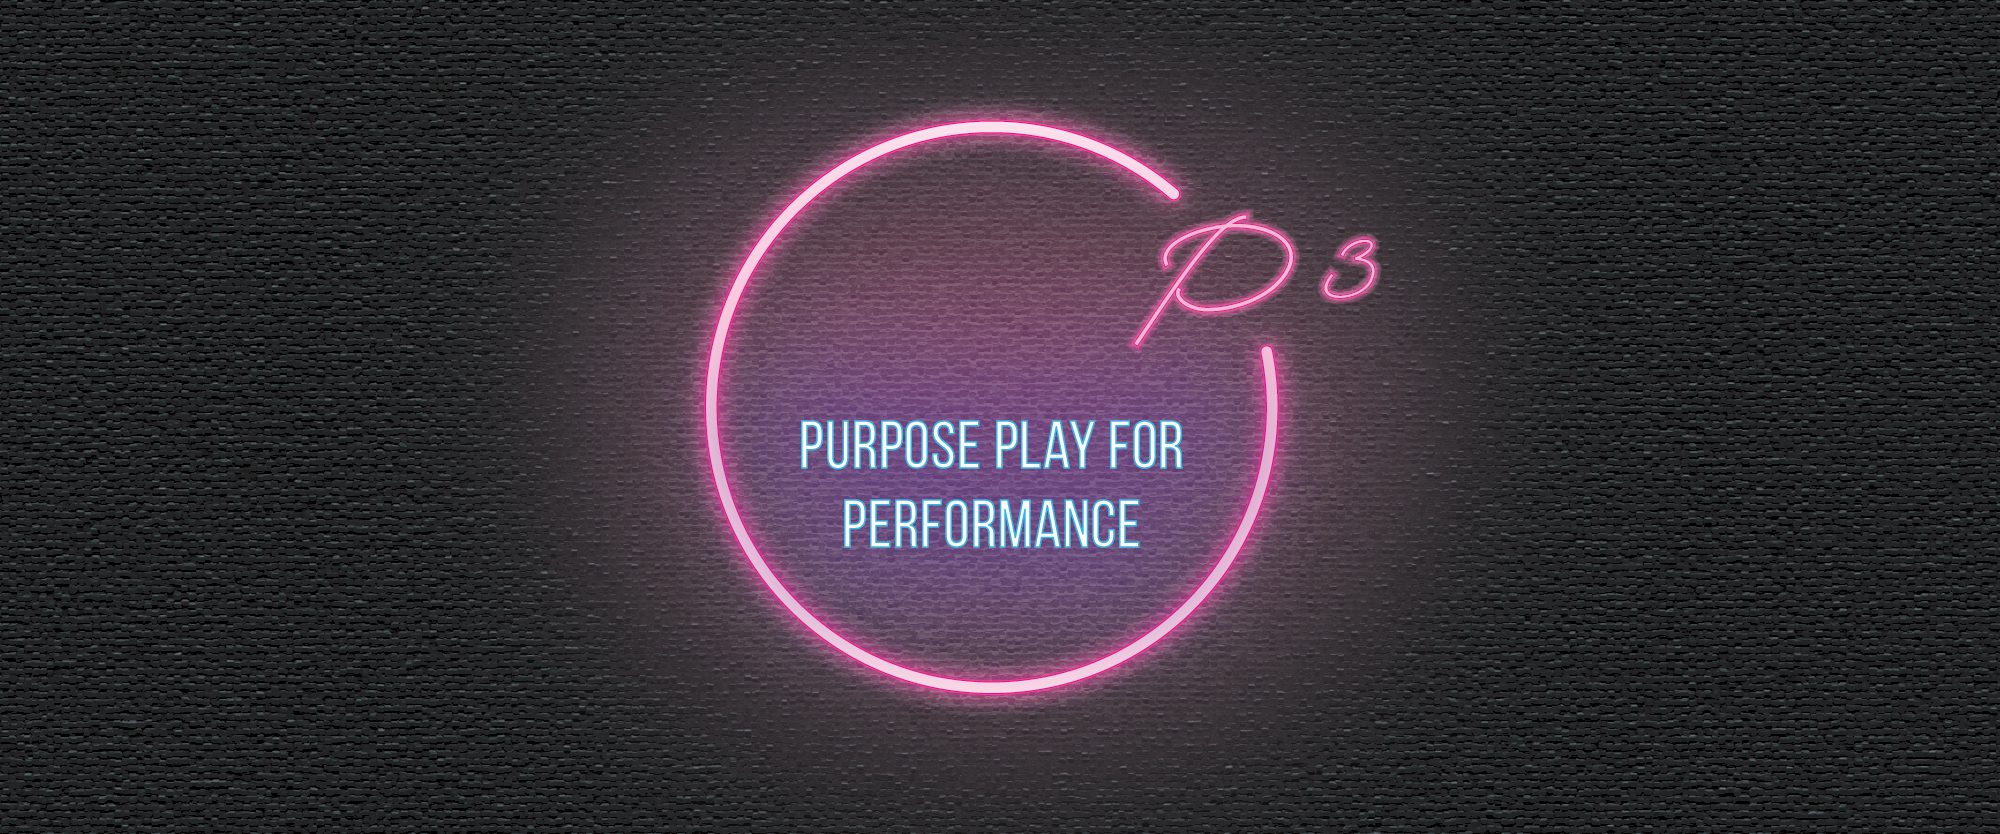 Purpose Play for Performance